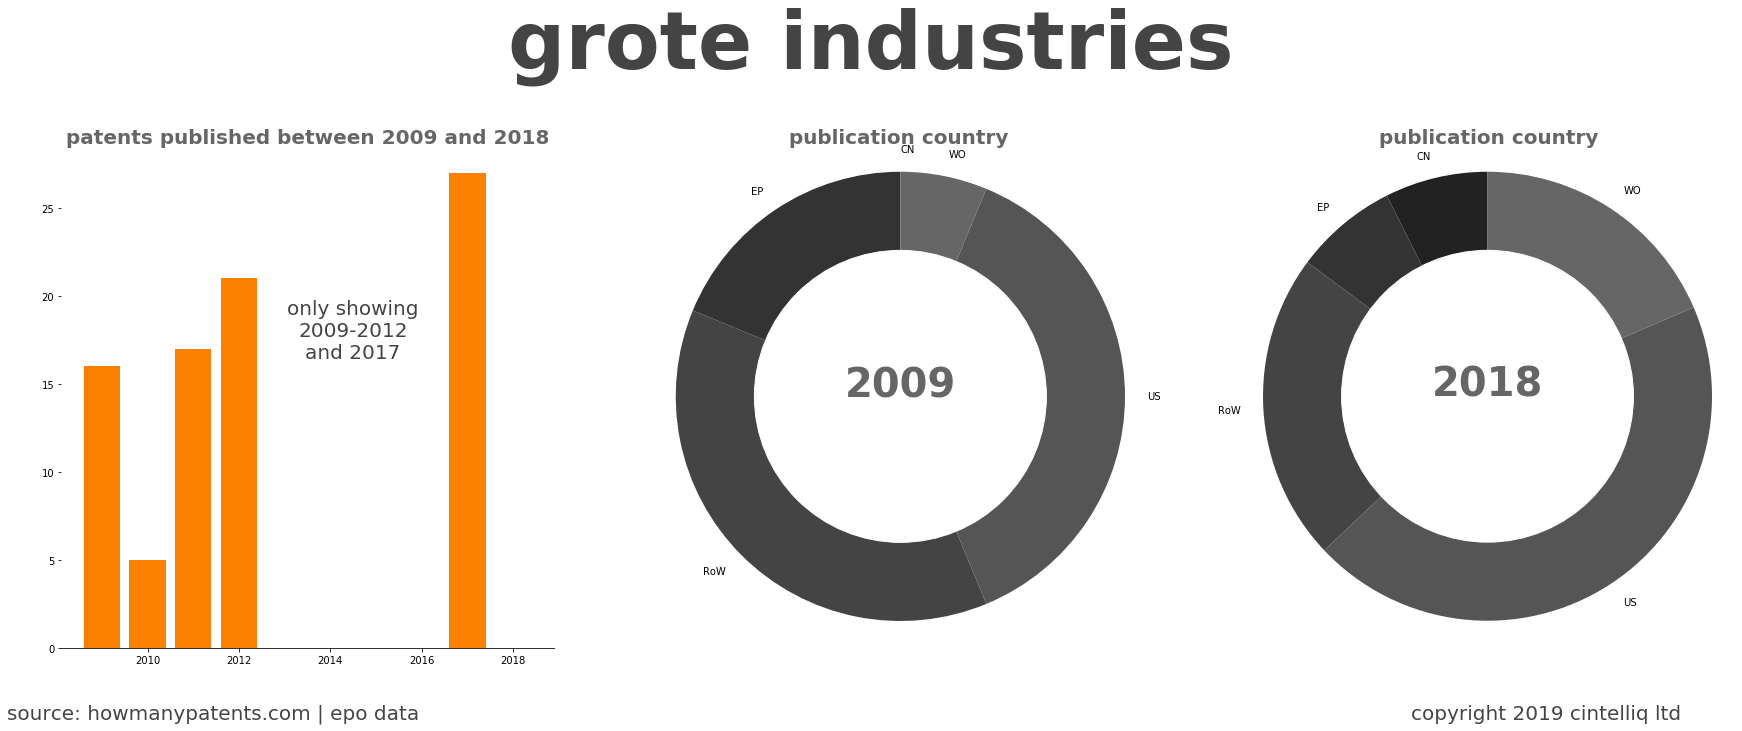 summary of patents for Grote Industries